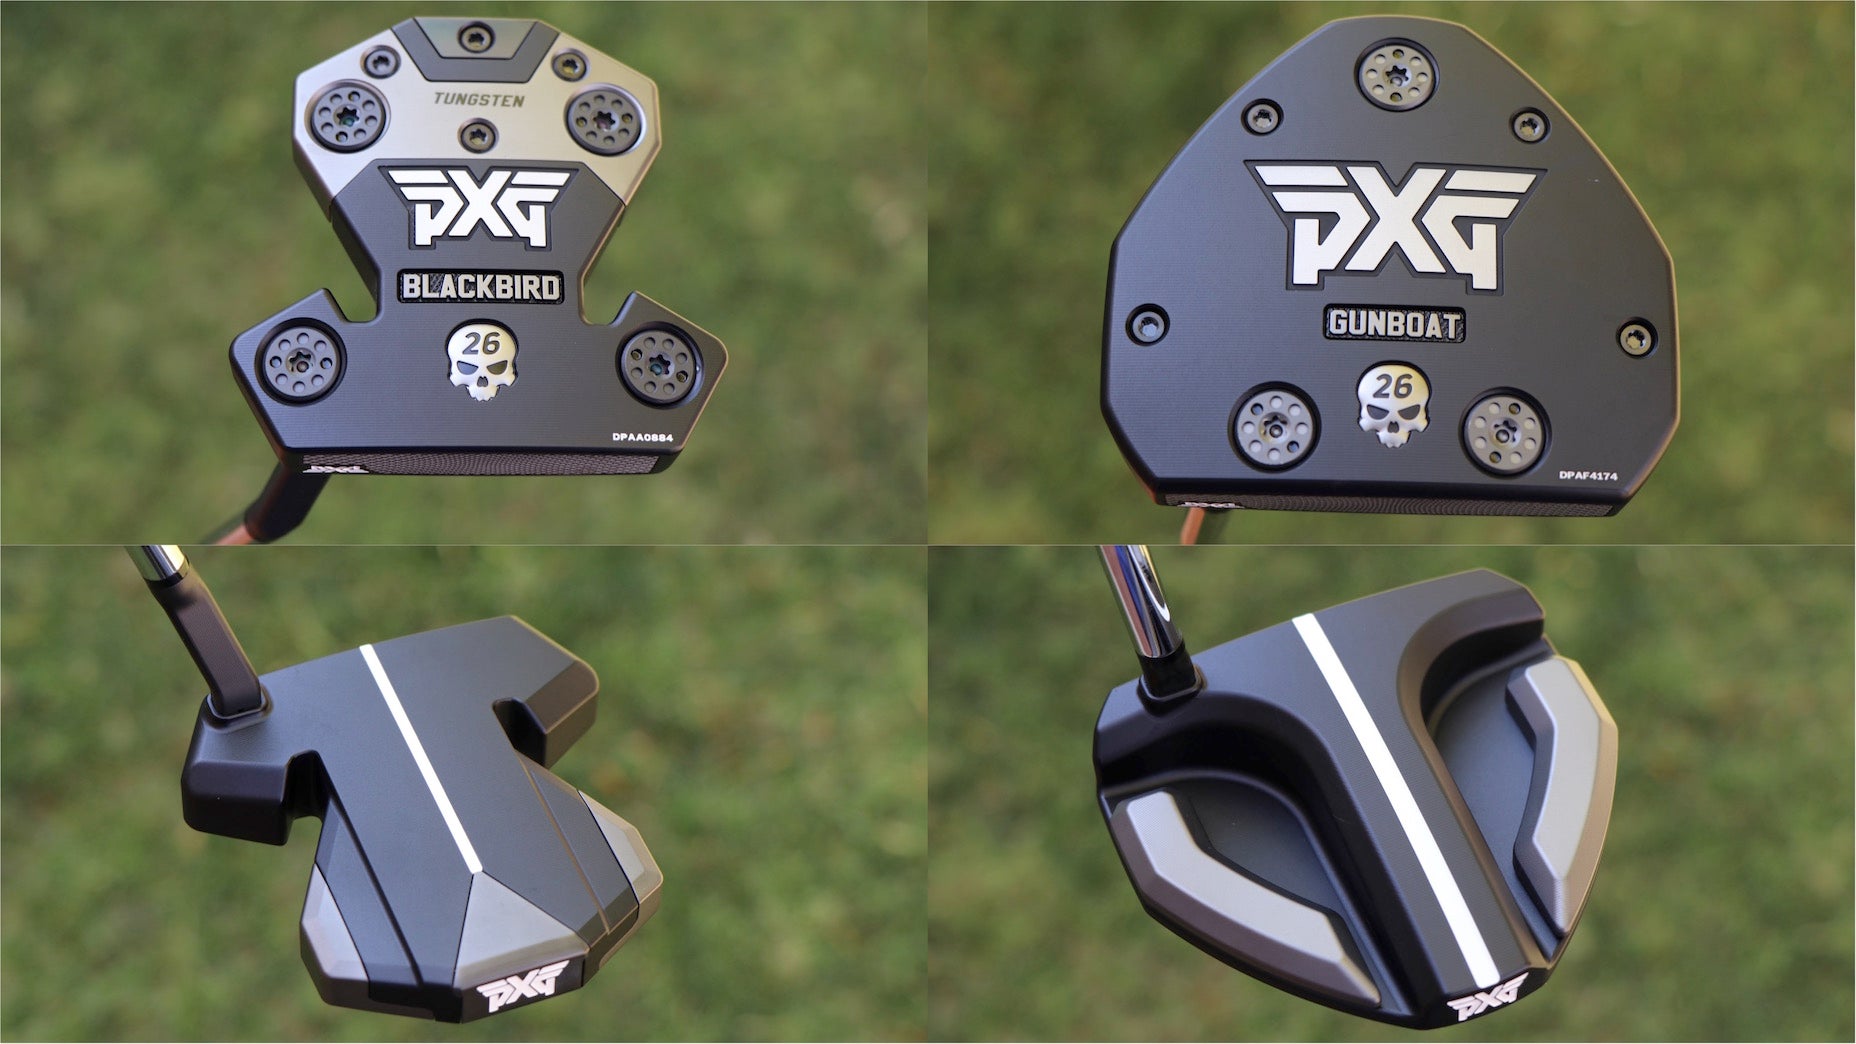 PXG expands Battle Ready lineup with new Gunboat and Blackbird mallets